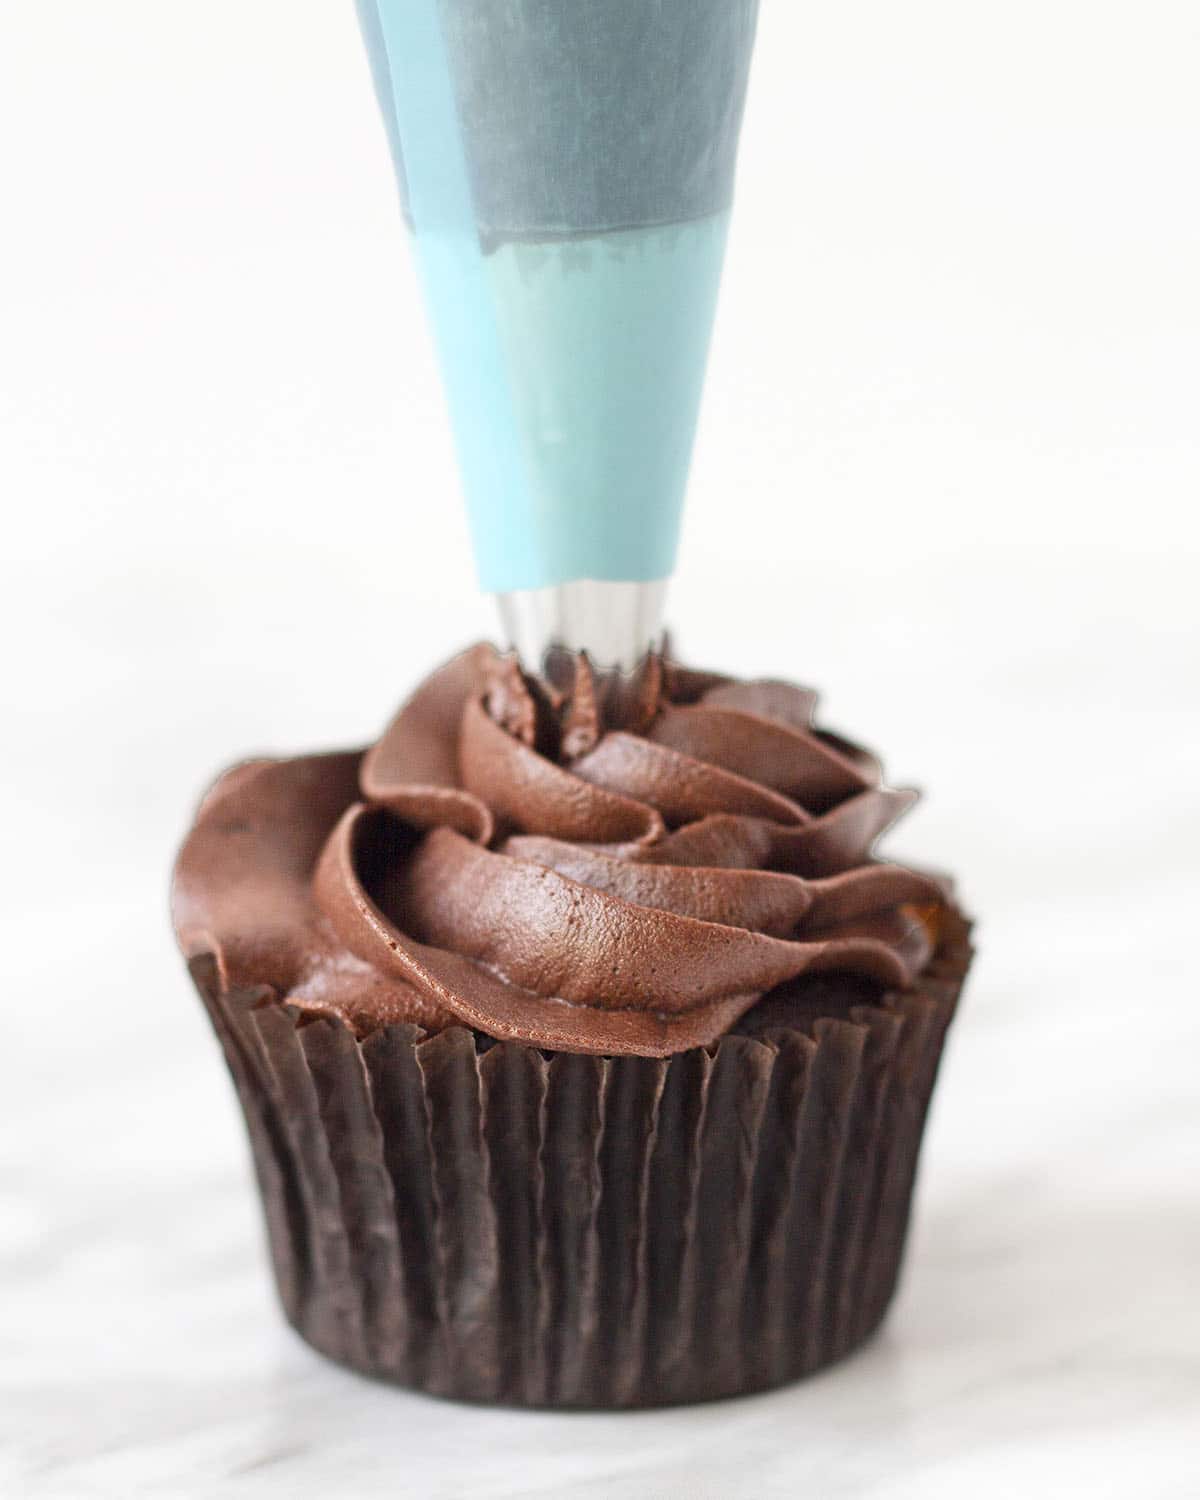 Dairy-free chocolate icing being piped onto a chocolate cupcake.